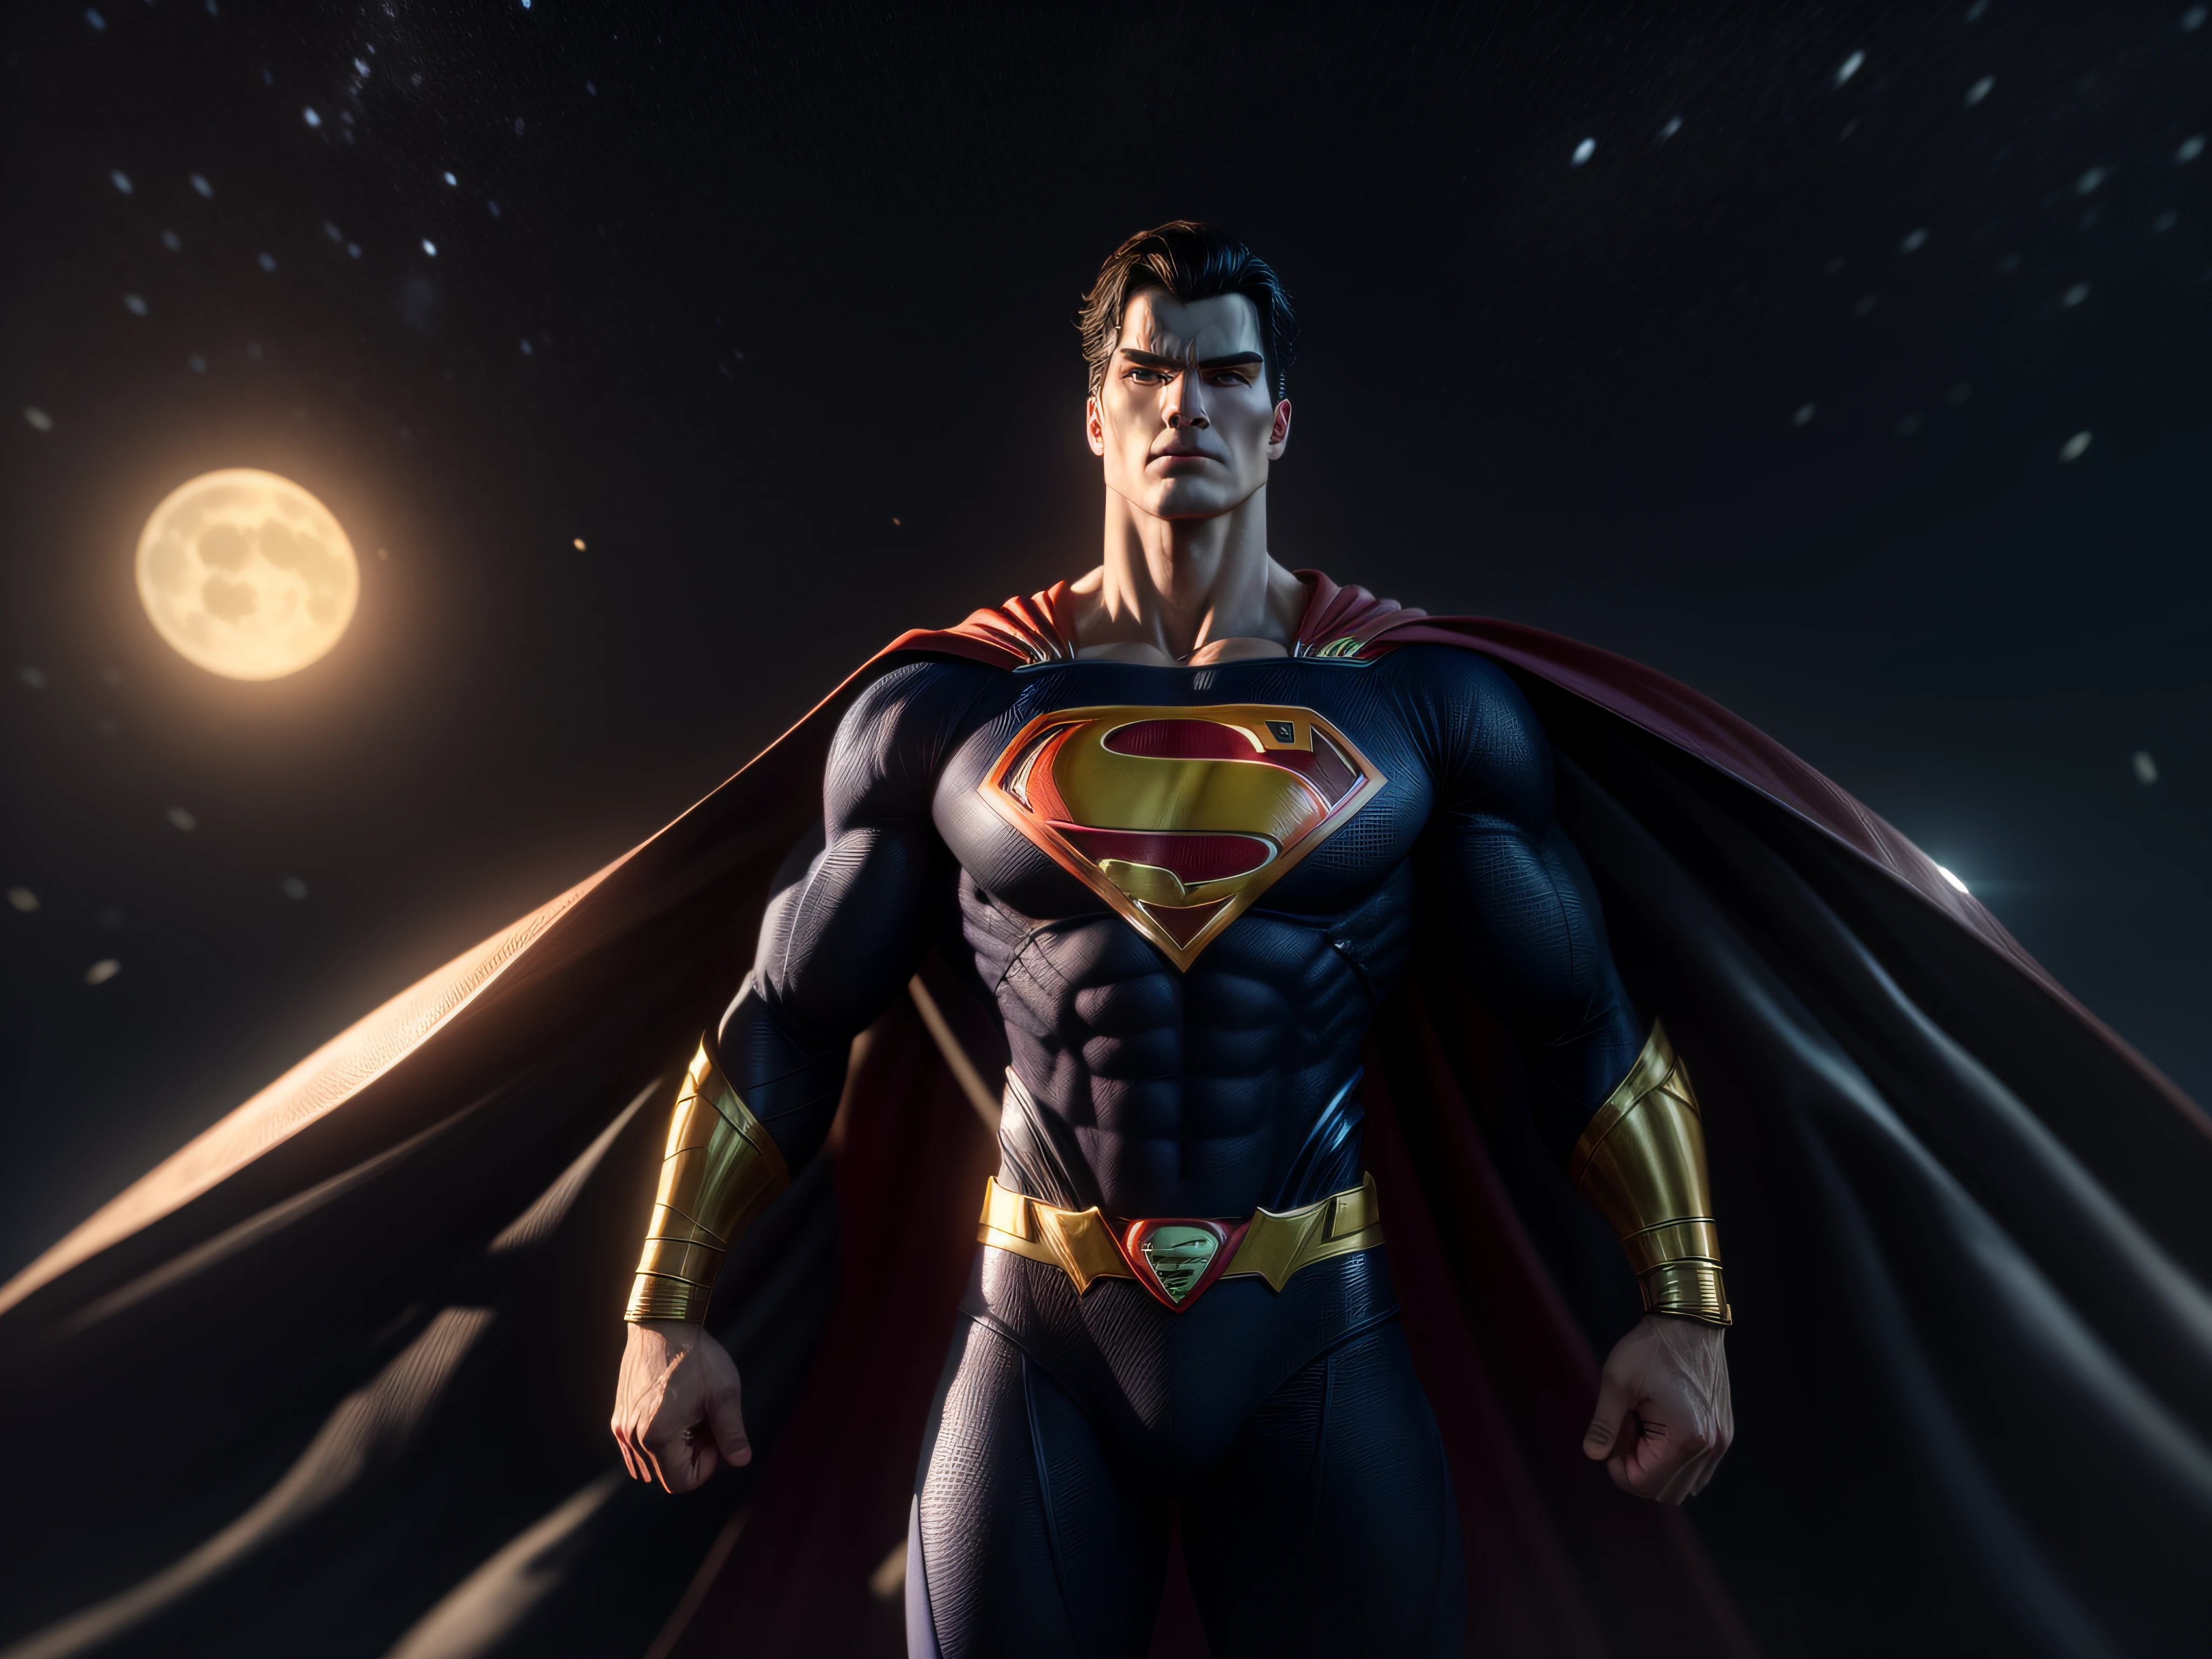 Close a powerful threat, The imposing appearance of the powerful Superman dressed in black and gold uniform, menacing stare, ricamente detalhado, Hiper realista, 3D-rendering, obra-prima, NVIDIA, RTX, ray-traced, Bokeh, Night sky with a huge and beautiful full moon, estrelas brilhando, 8k,